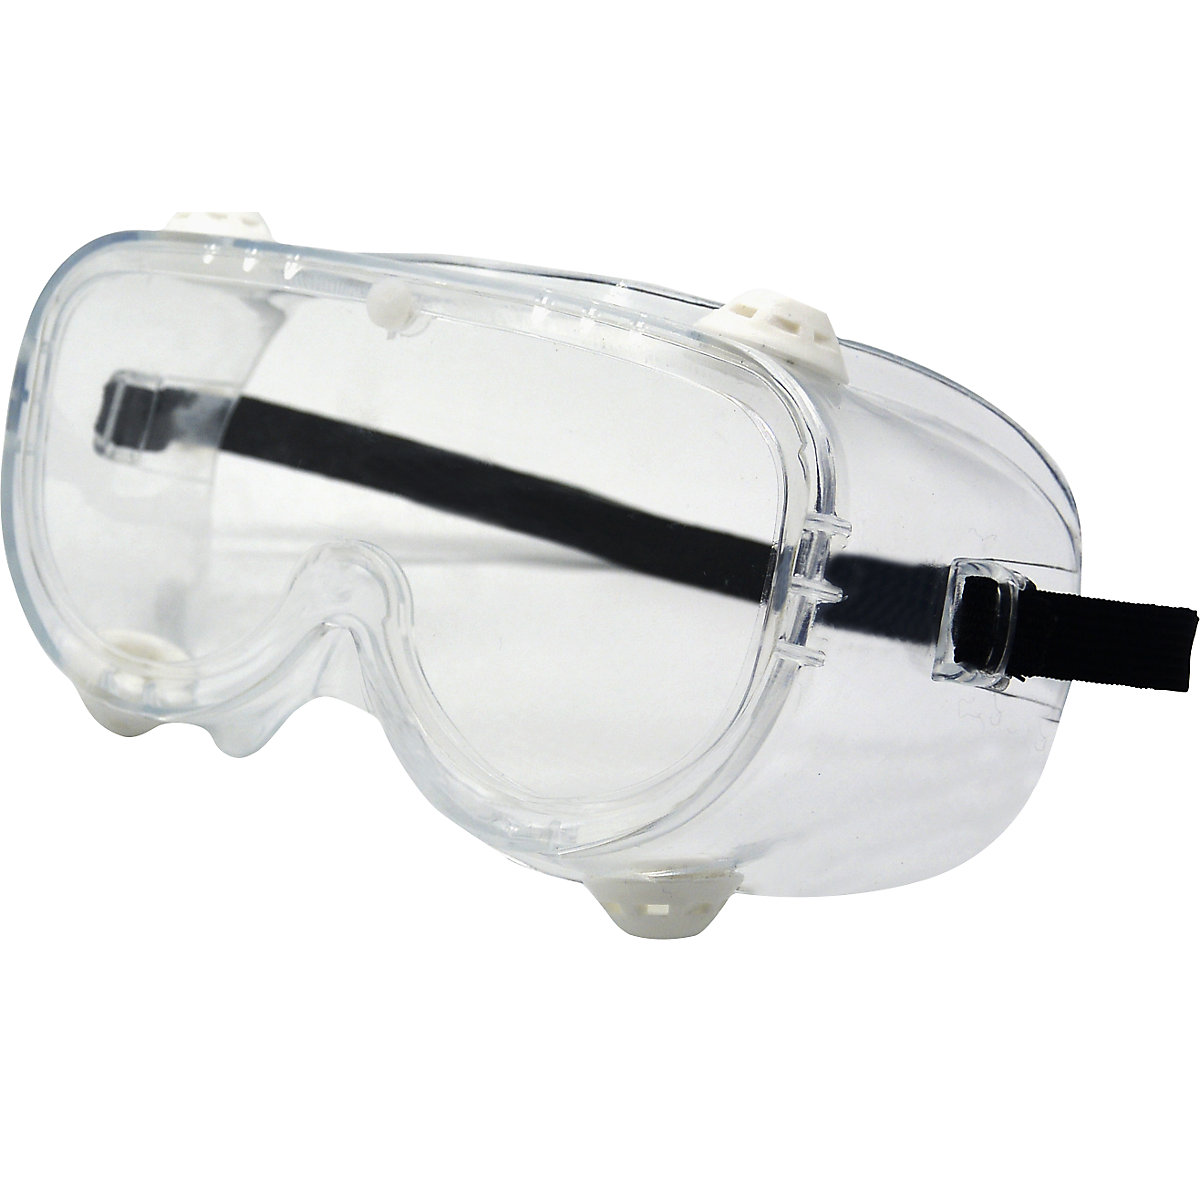 Full vision protective goggles EN 166 (pack of 10 or 200 pieces)